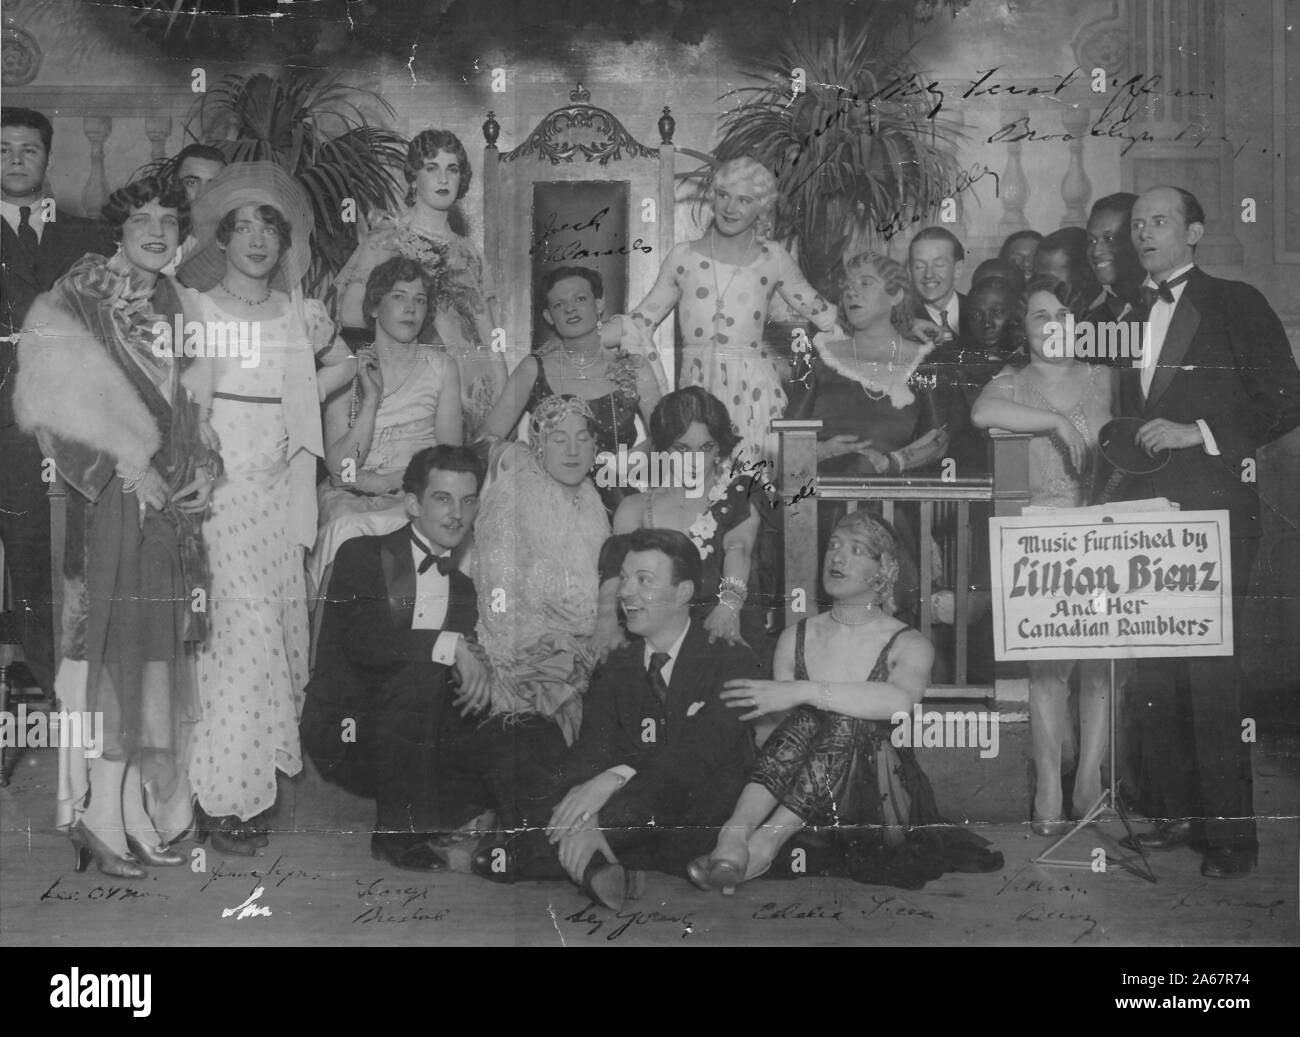 A group of drag queens, or men dressed in drag, pose for a group photo in front of a backdrop with a large crown prop chair, many in dresses and elegant clothing, with sign noting that music was provided by Lillian Benz and her Canadian Ramblers, a musical group, Brooklyn, New York, 1929. () Stock Photo